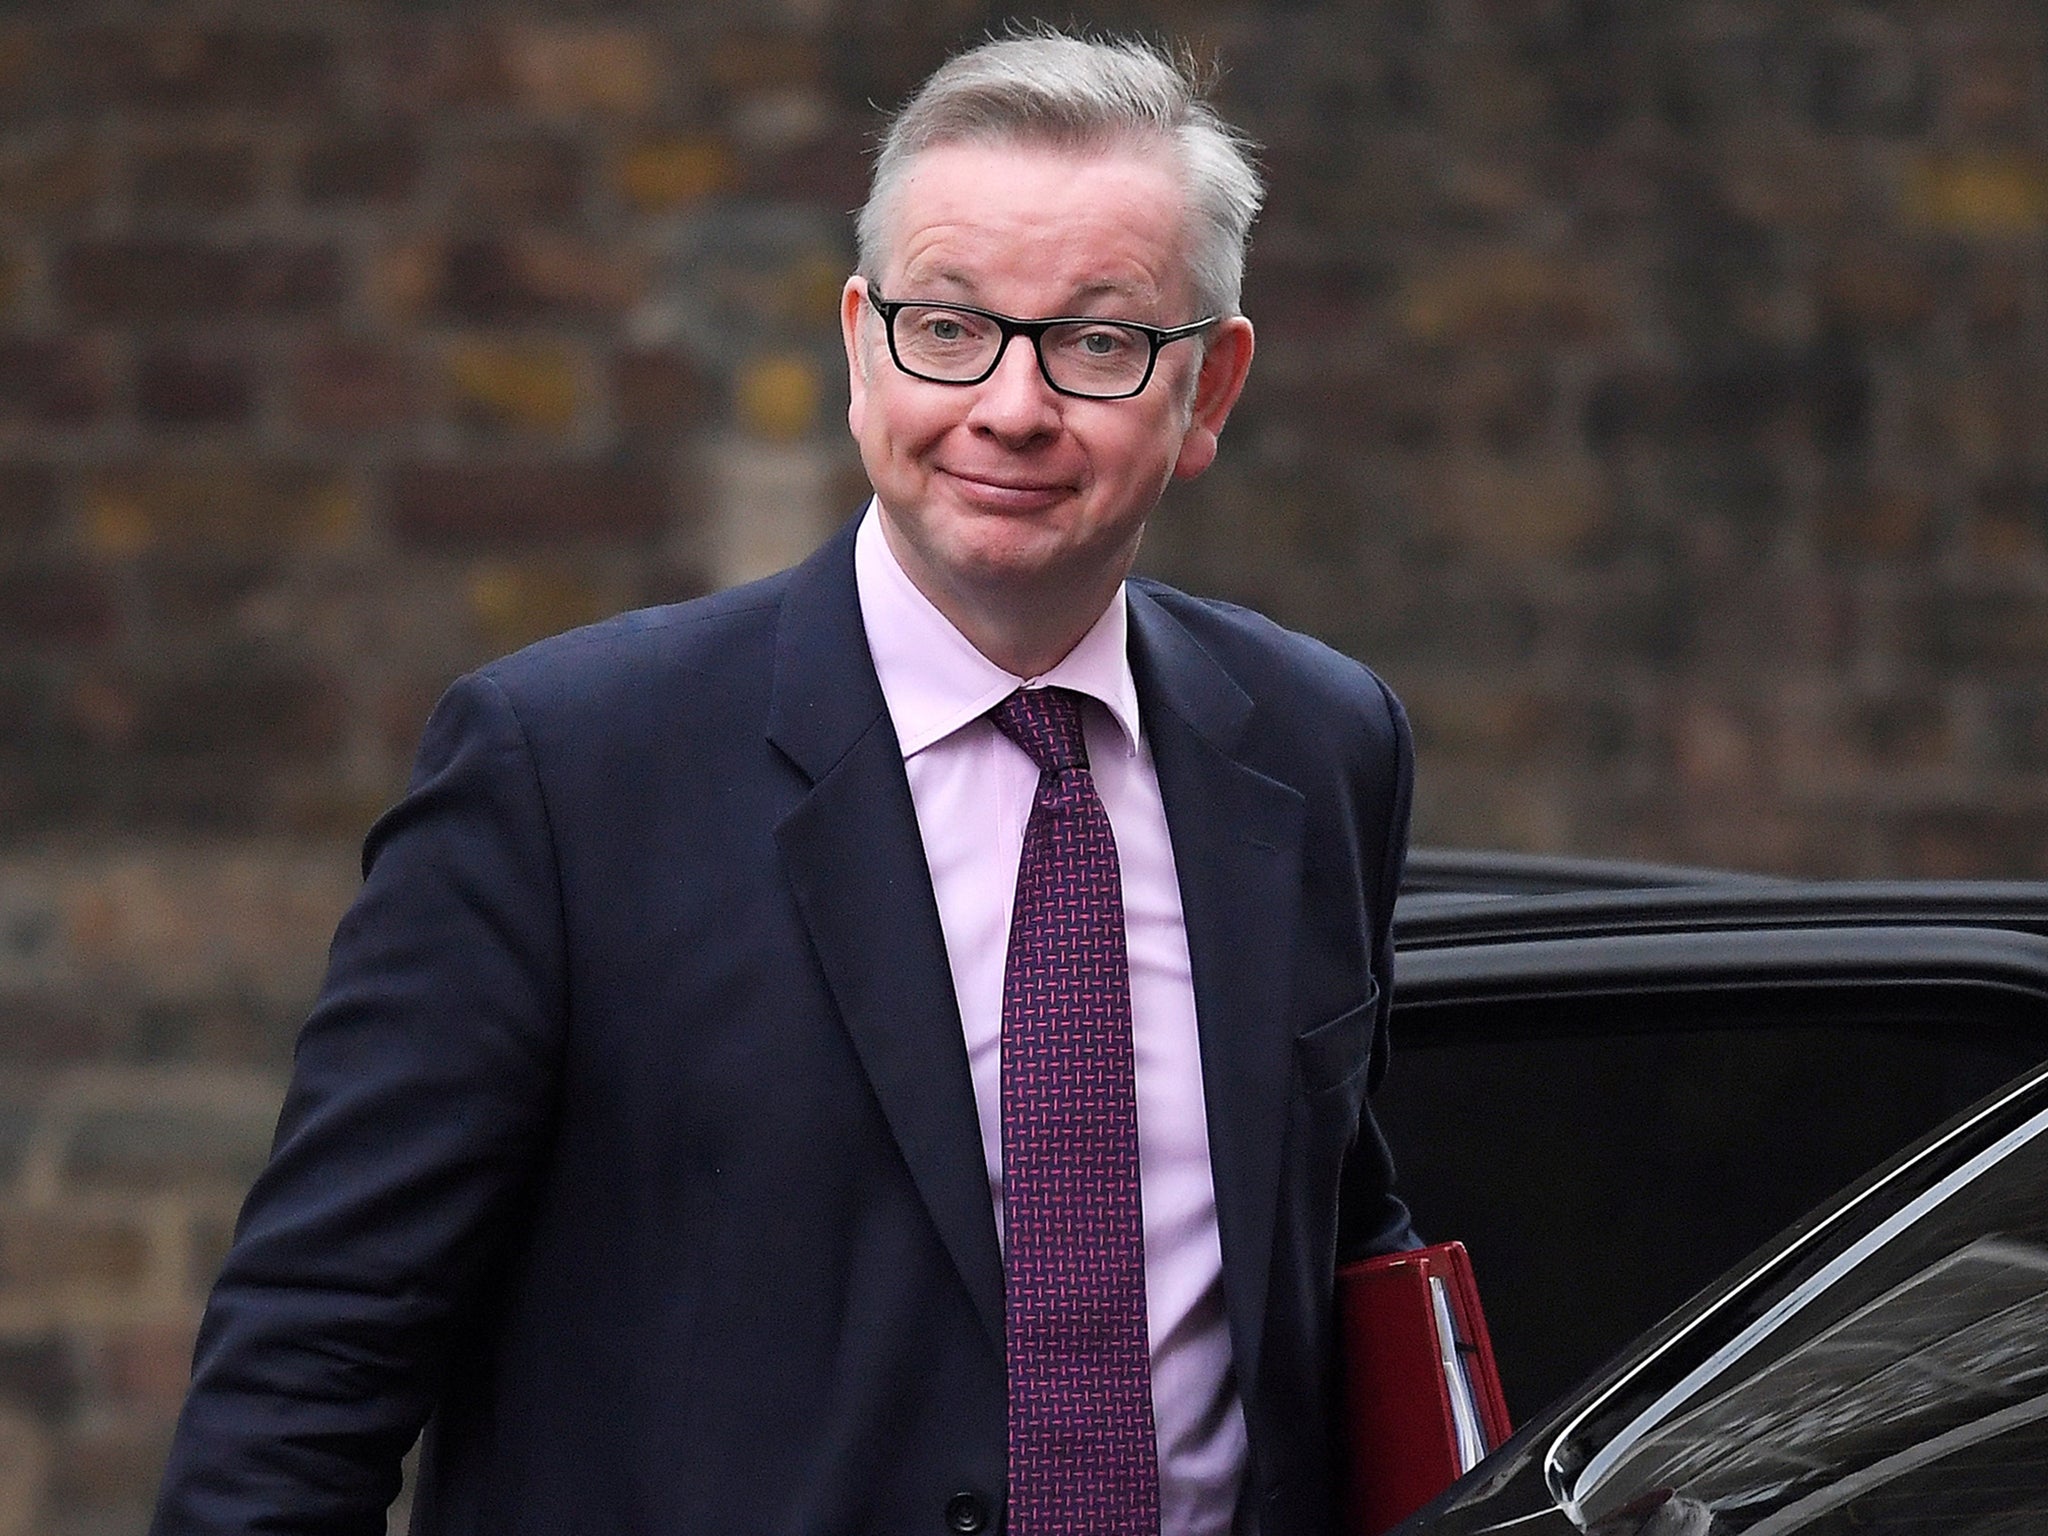 Michael Gove arrives in Downing Street